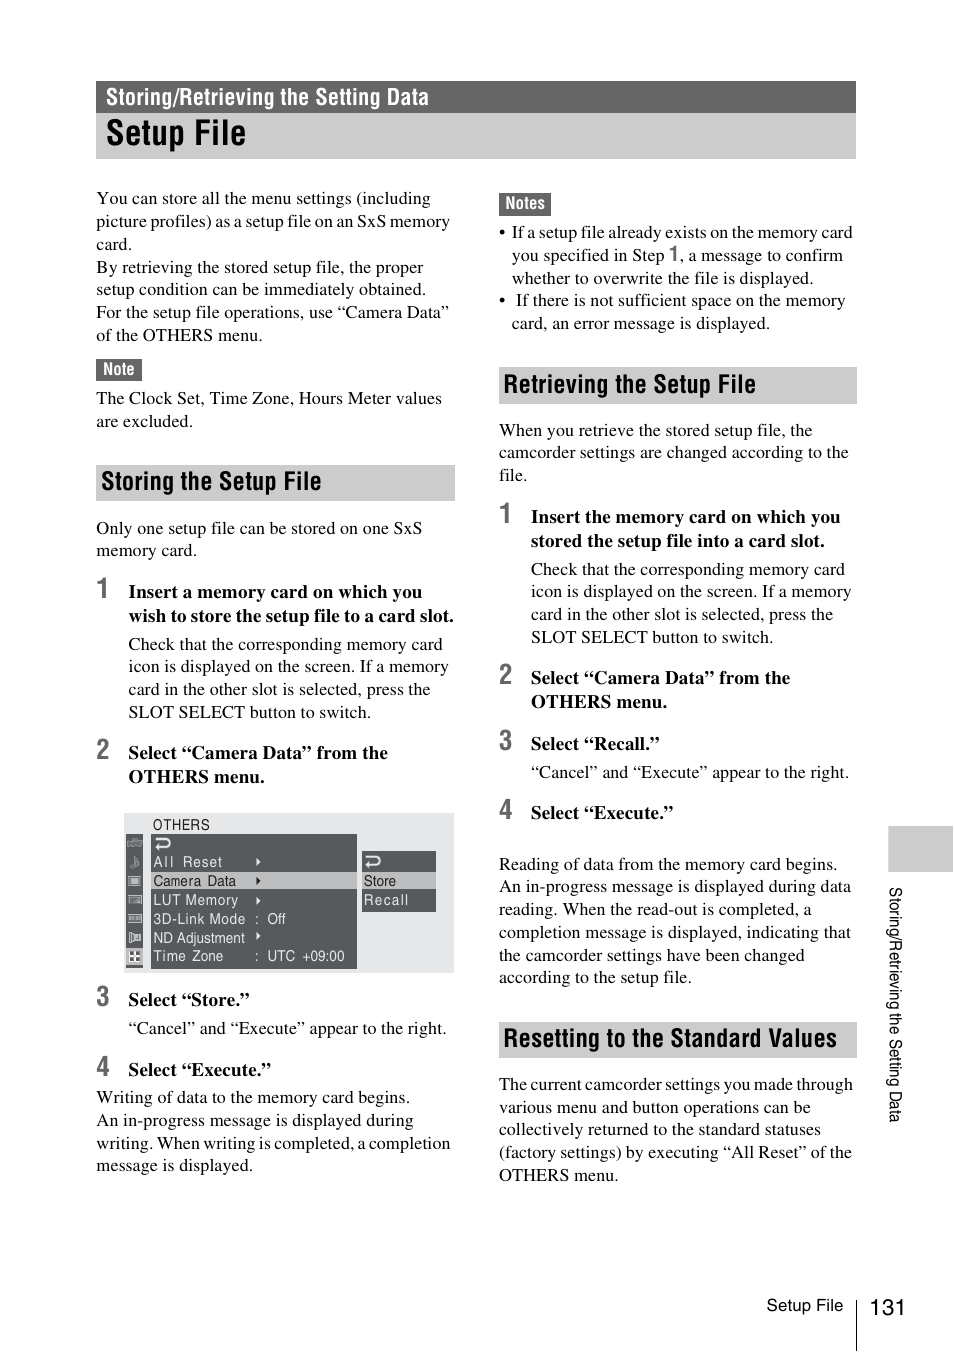 Storing/retrieving the setting data, Setup file, Storing the setup file | Retrieving the setup file, Resetting to the standard values | Sony PMW-F3K User Manual | Page 131 / 164